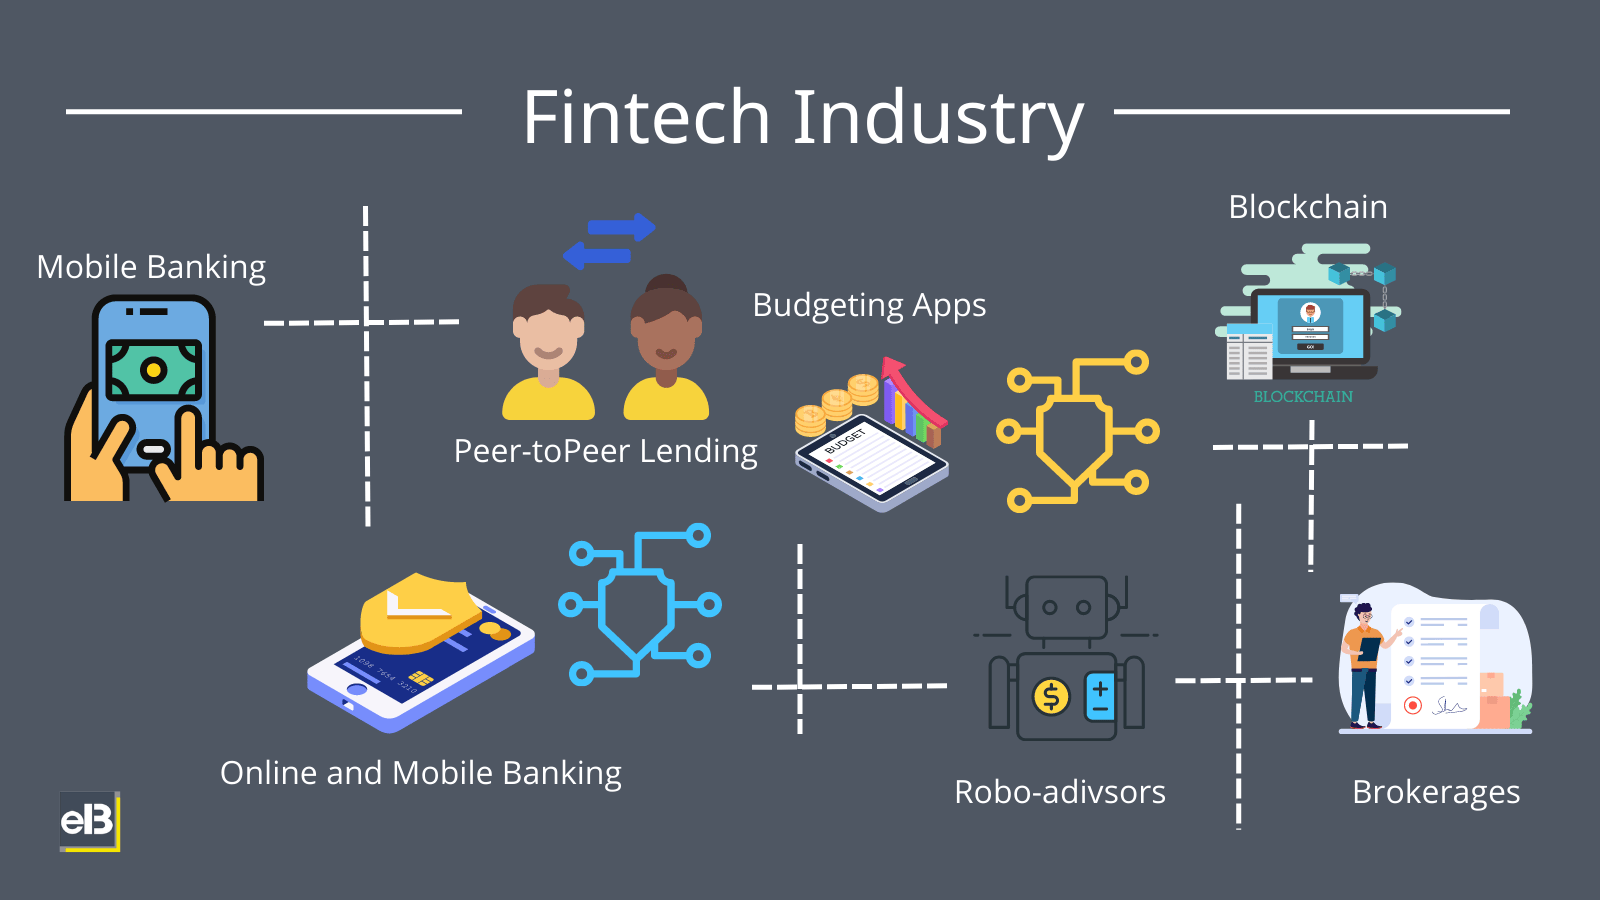 Diagram of the fintech industry including mobile banking, budgeting apps, and blockchain